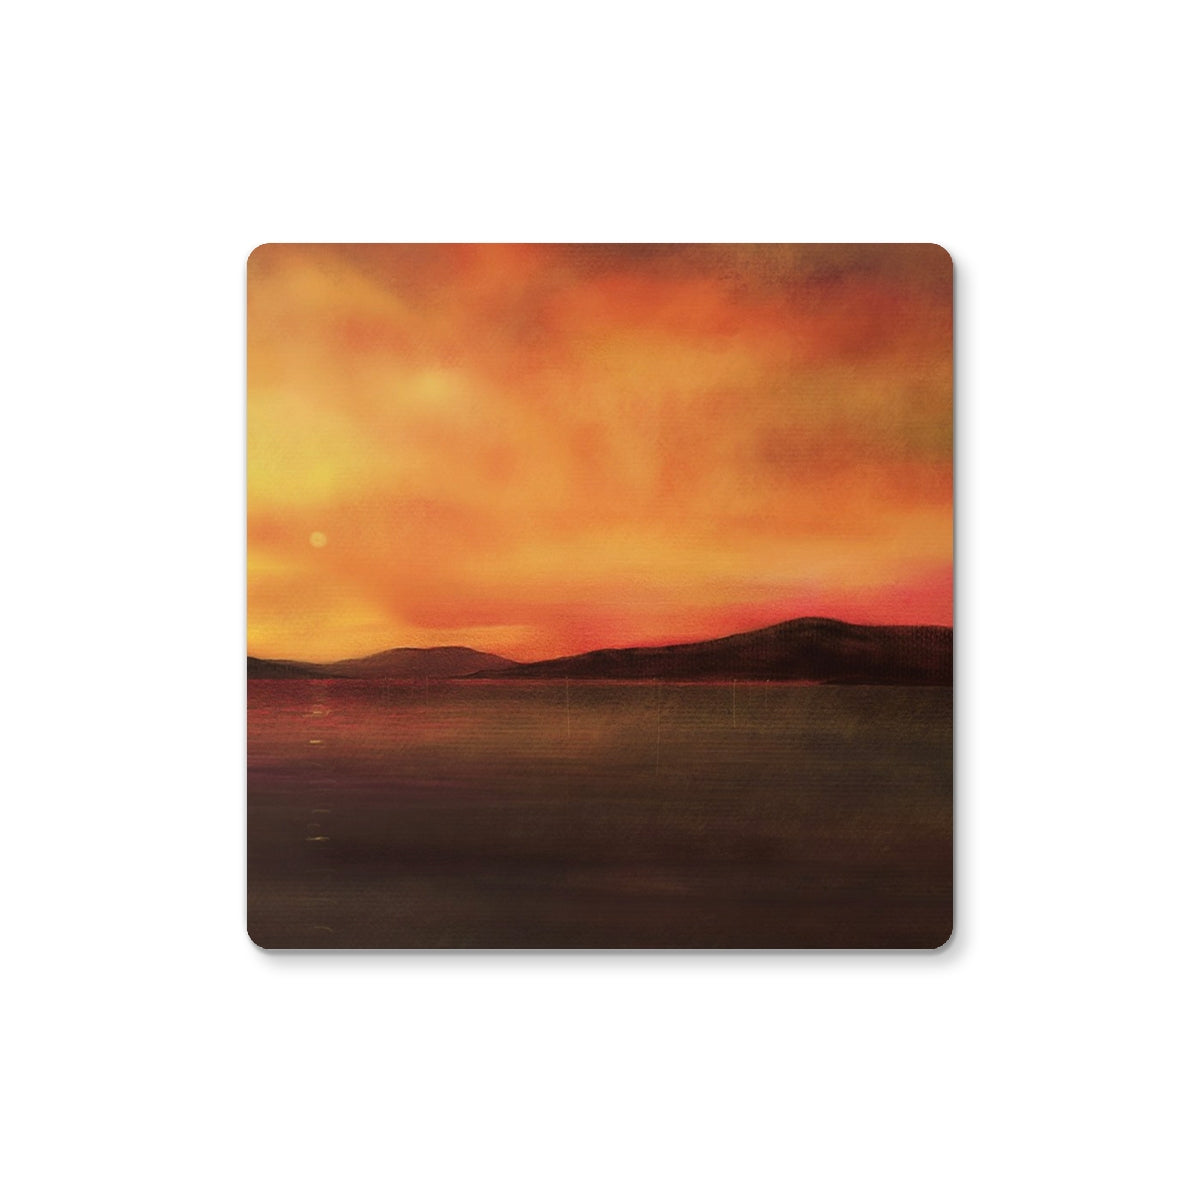 Harris Sunset Art Gifts Coaster-Coasters-Hebridean Islands Art Gallery-Single Coaster-Paintings, Prints, Homeware, Art Gifts From Scotland By Scottish Artist Kevin Hunter